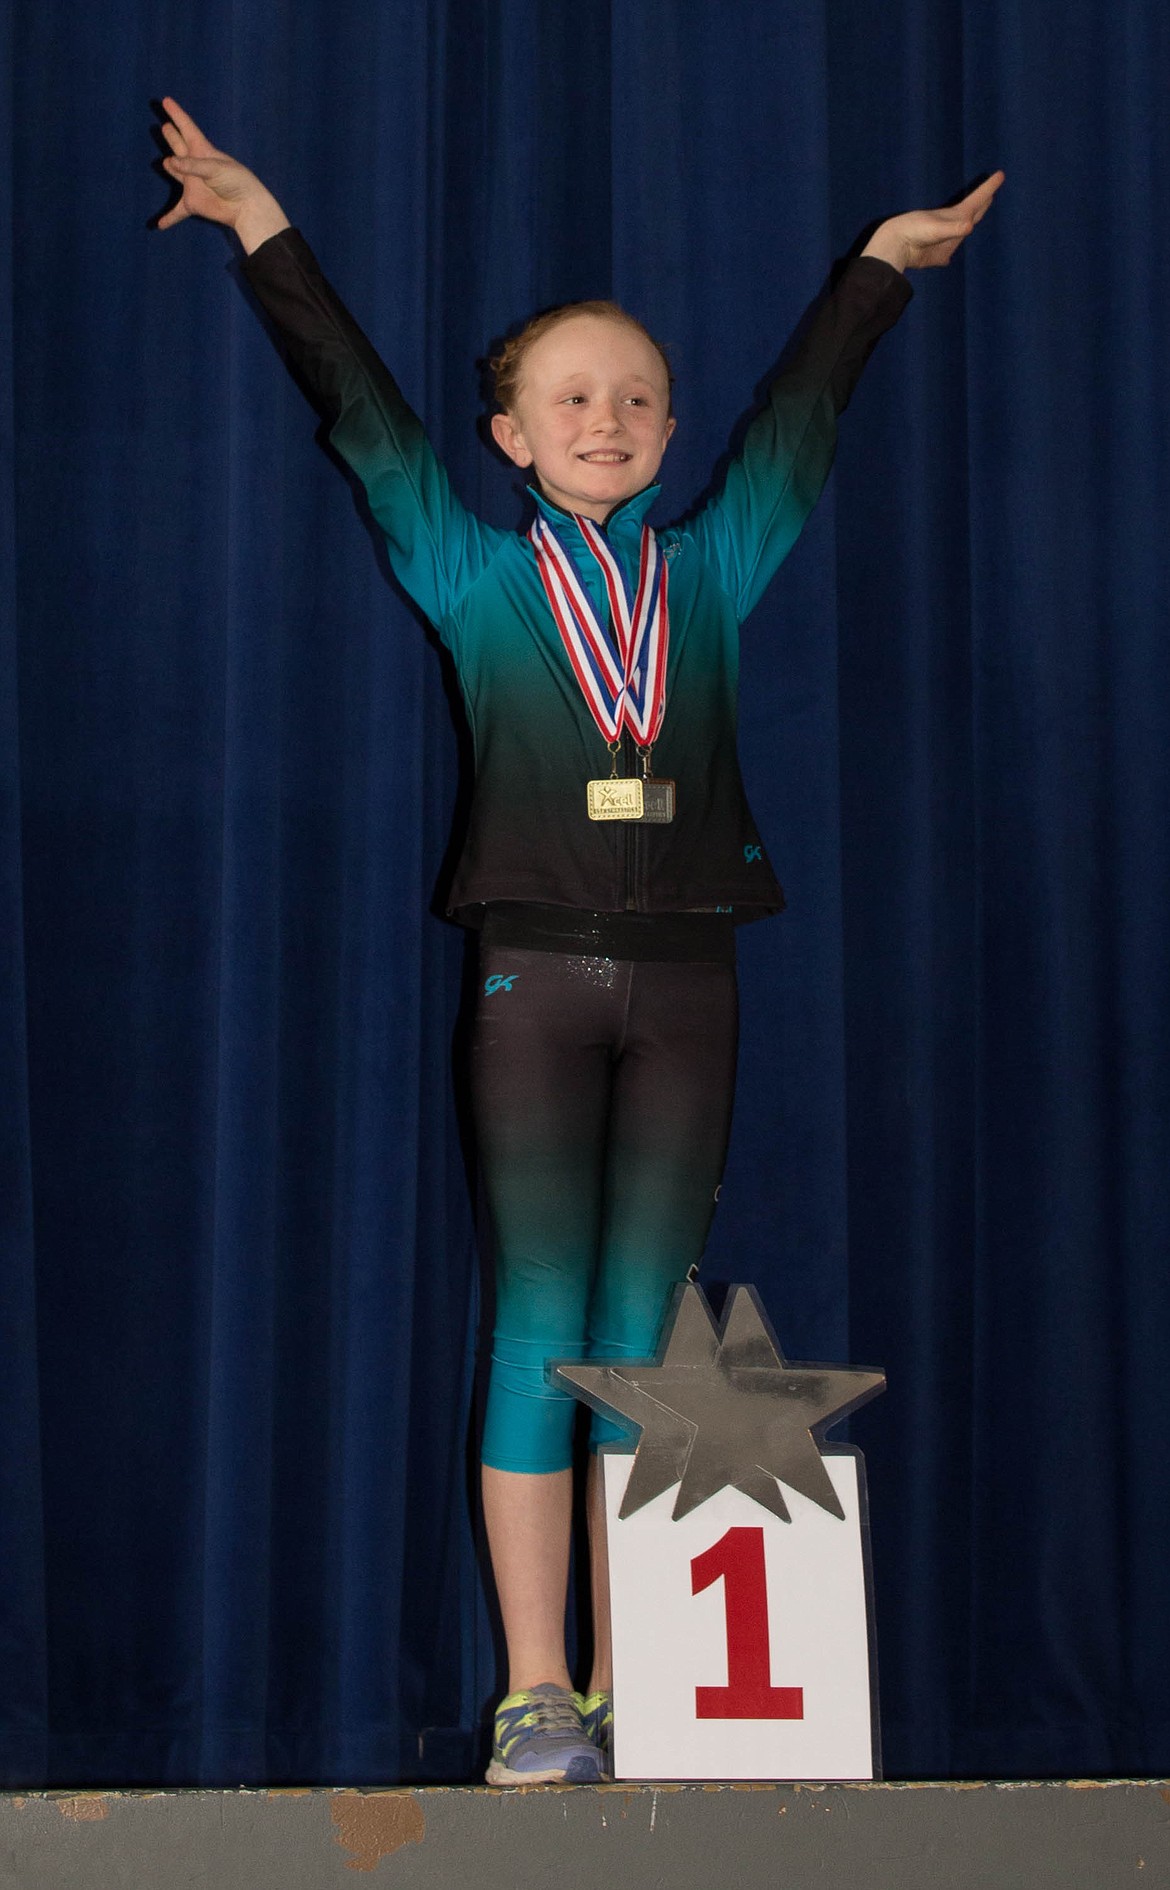 Courtesy photo
Mady Riley of Technique Gymnastics won the All Around and Beam at the recent Xcel state championships in Meridian.